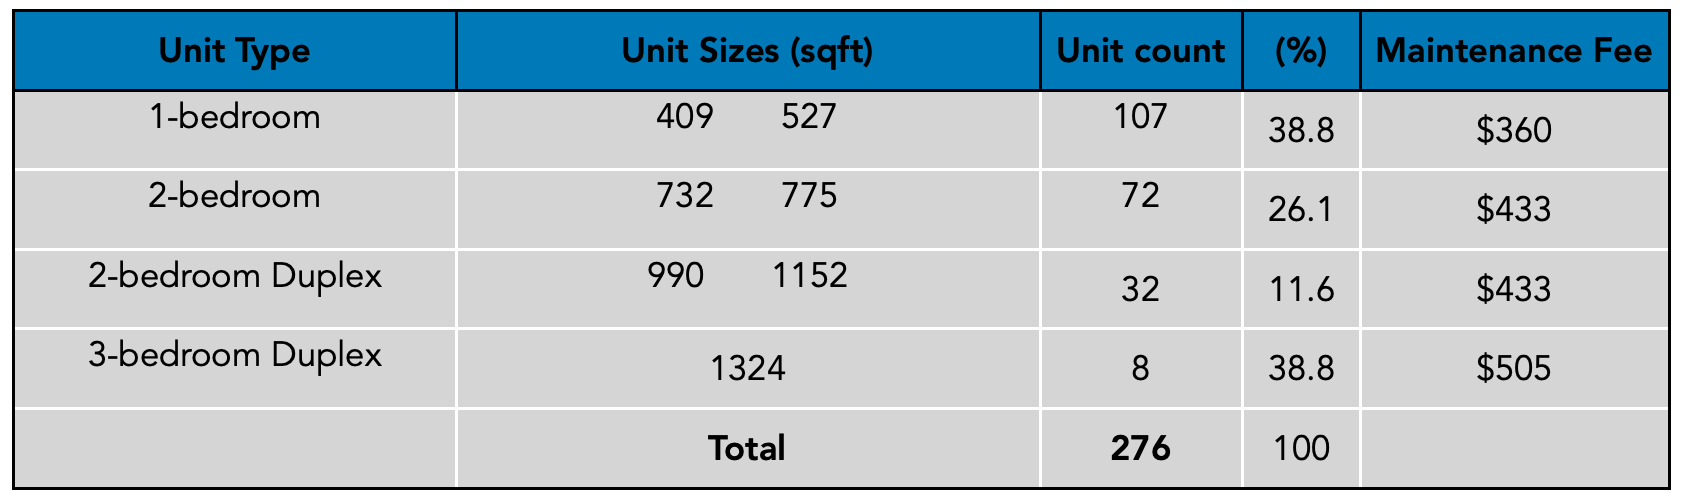 Midtown Bay Unit Breakdown PropertyLimBrothers.png